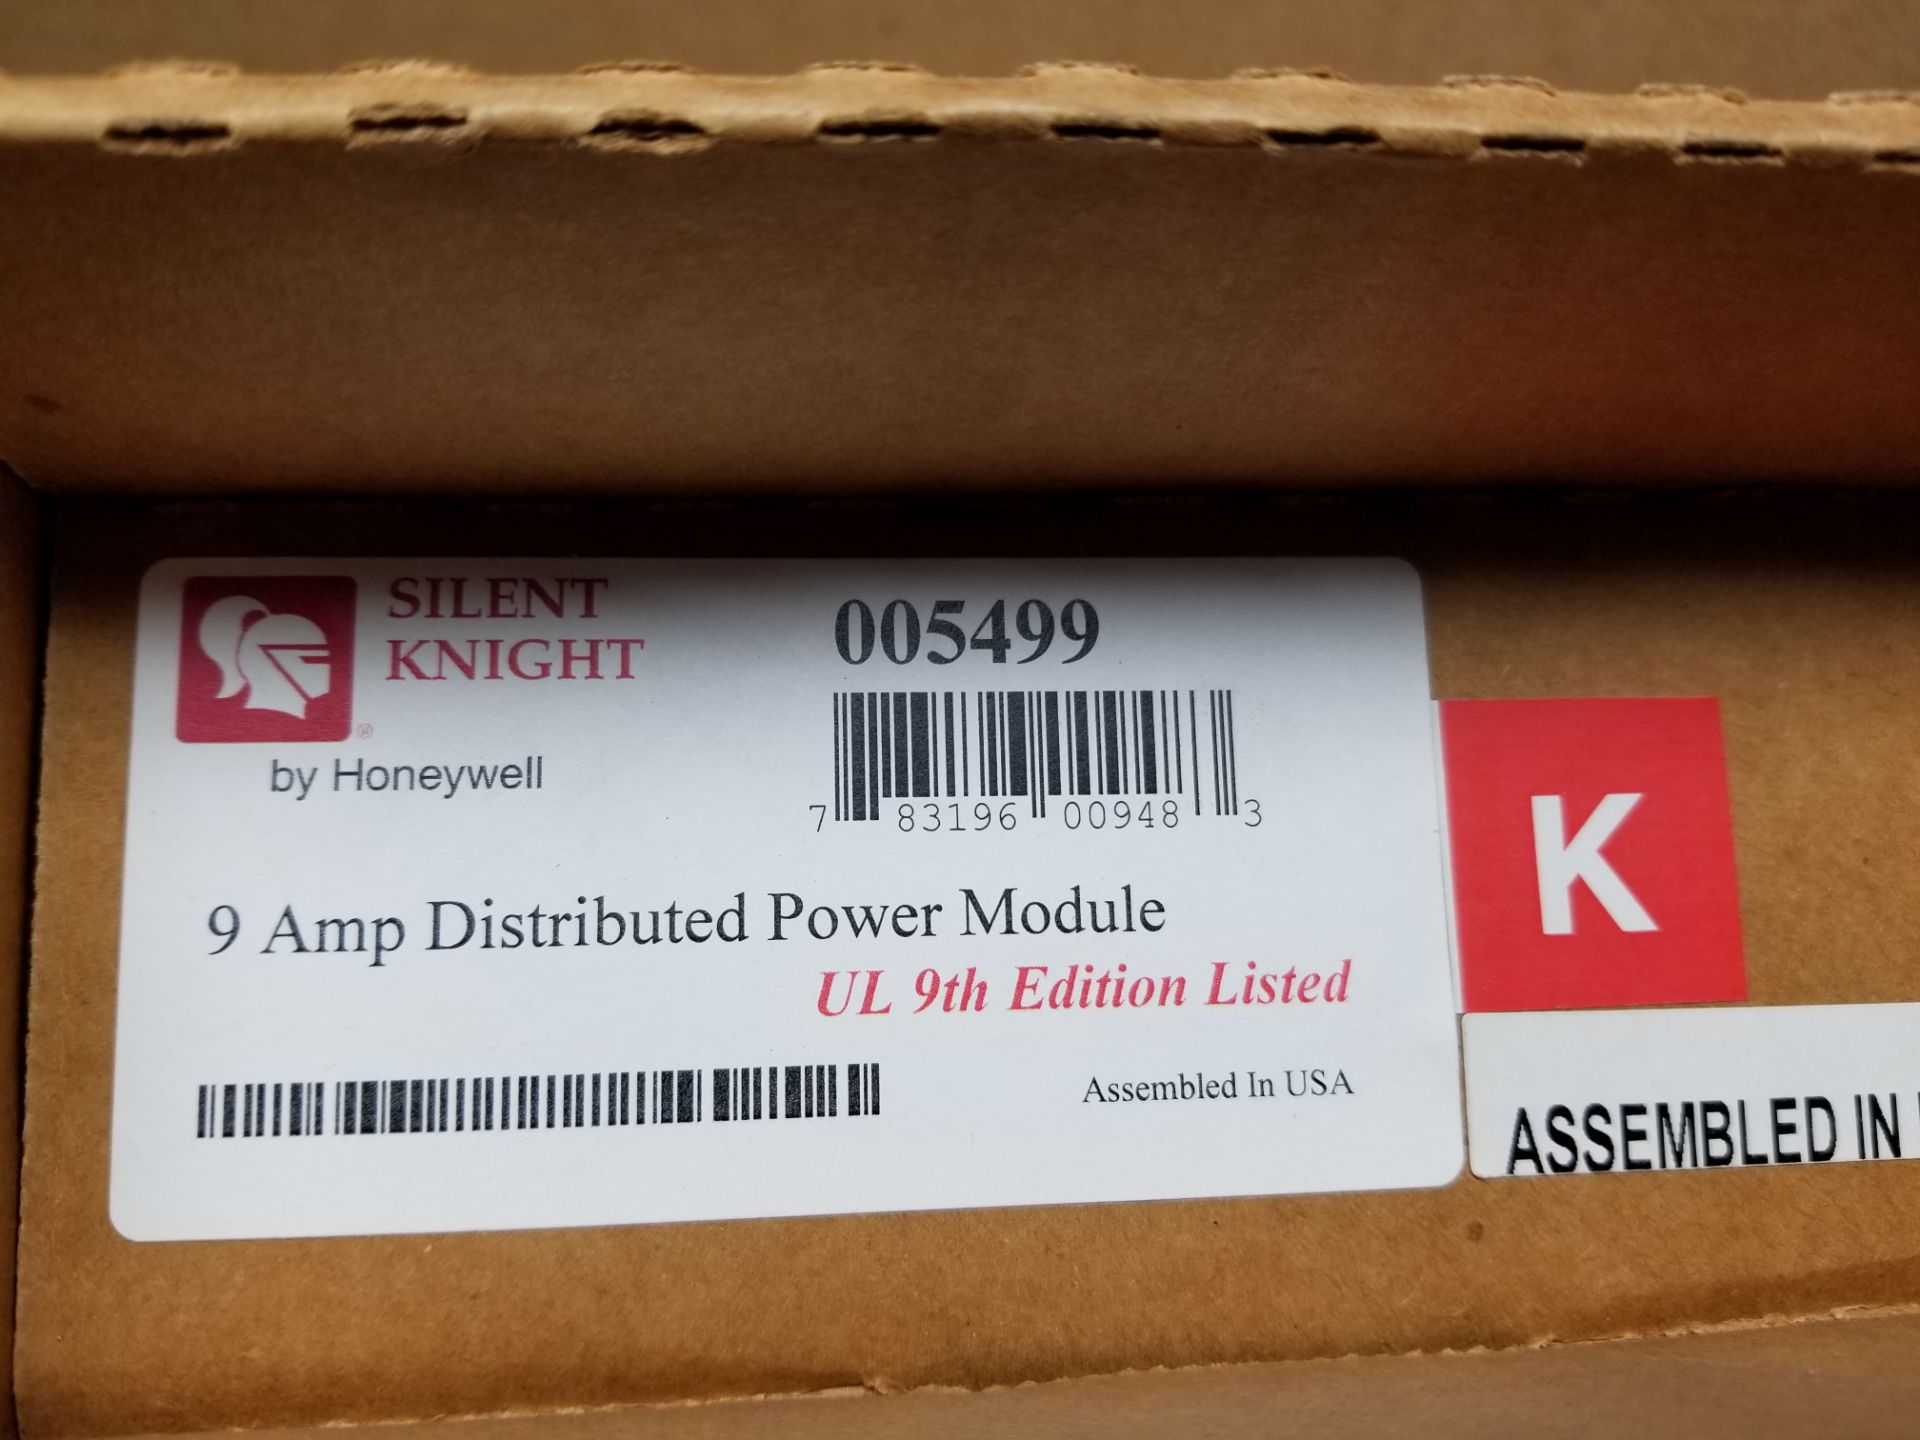 NEW SILENT KNIGHT 9 AMP DISTRIBUTED POWER MODULE - Image 2 of 3